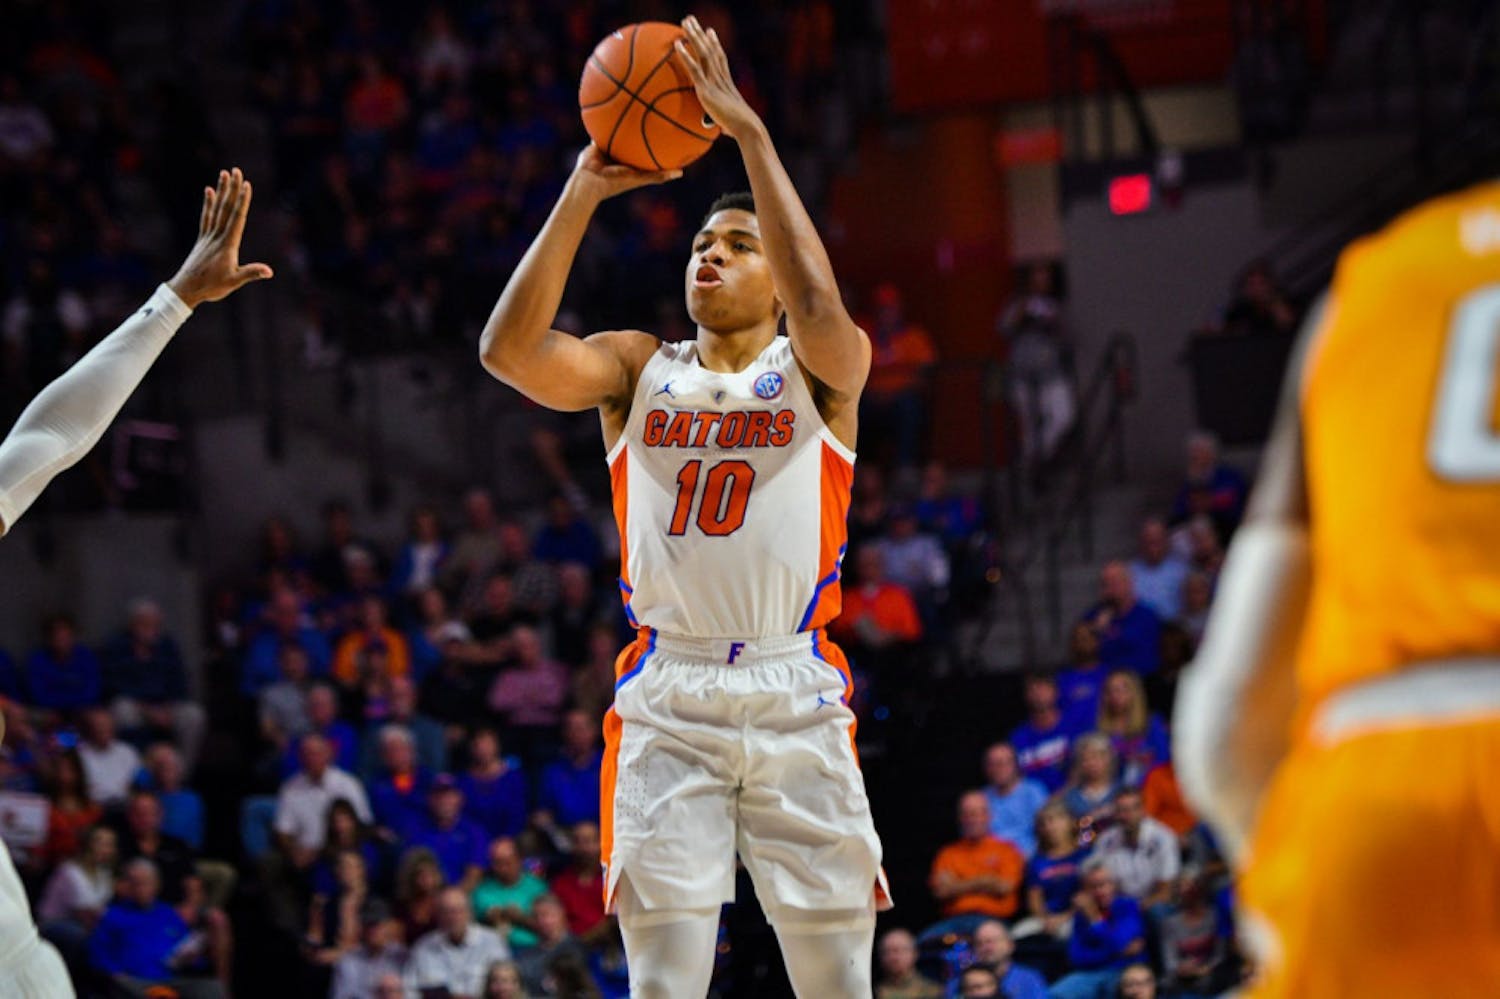 UF guard Noah Locke scored&nbsp;16 points, including a 4-of-9 from three-point range in the Gators' 78-67 loss to Tennessee on Saturday.